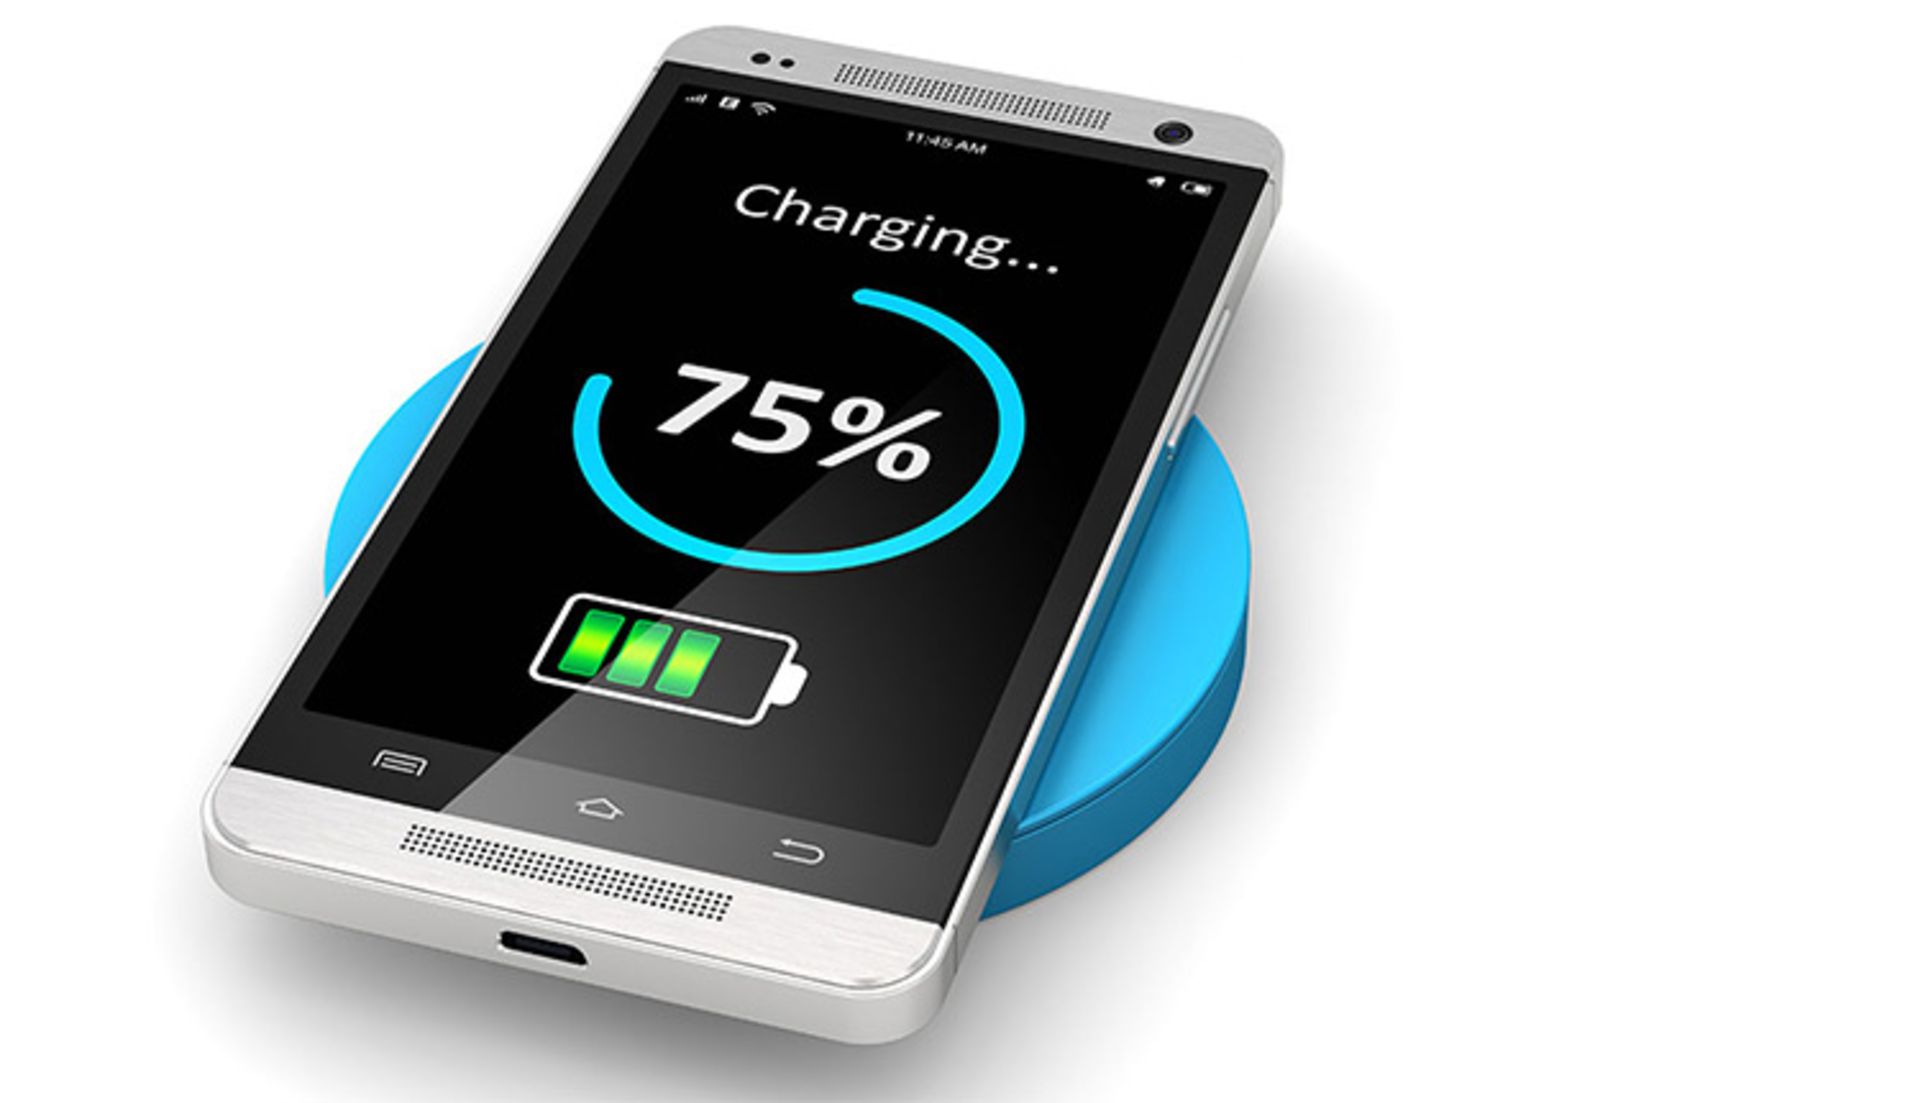 75 percent charged